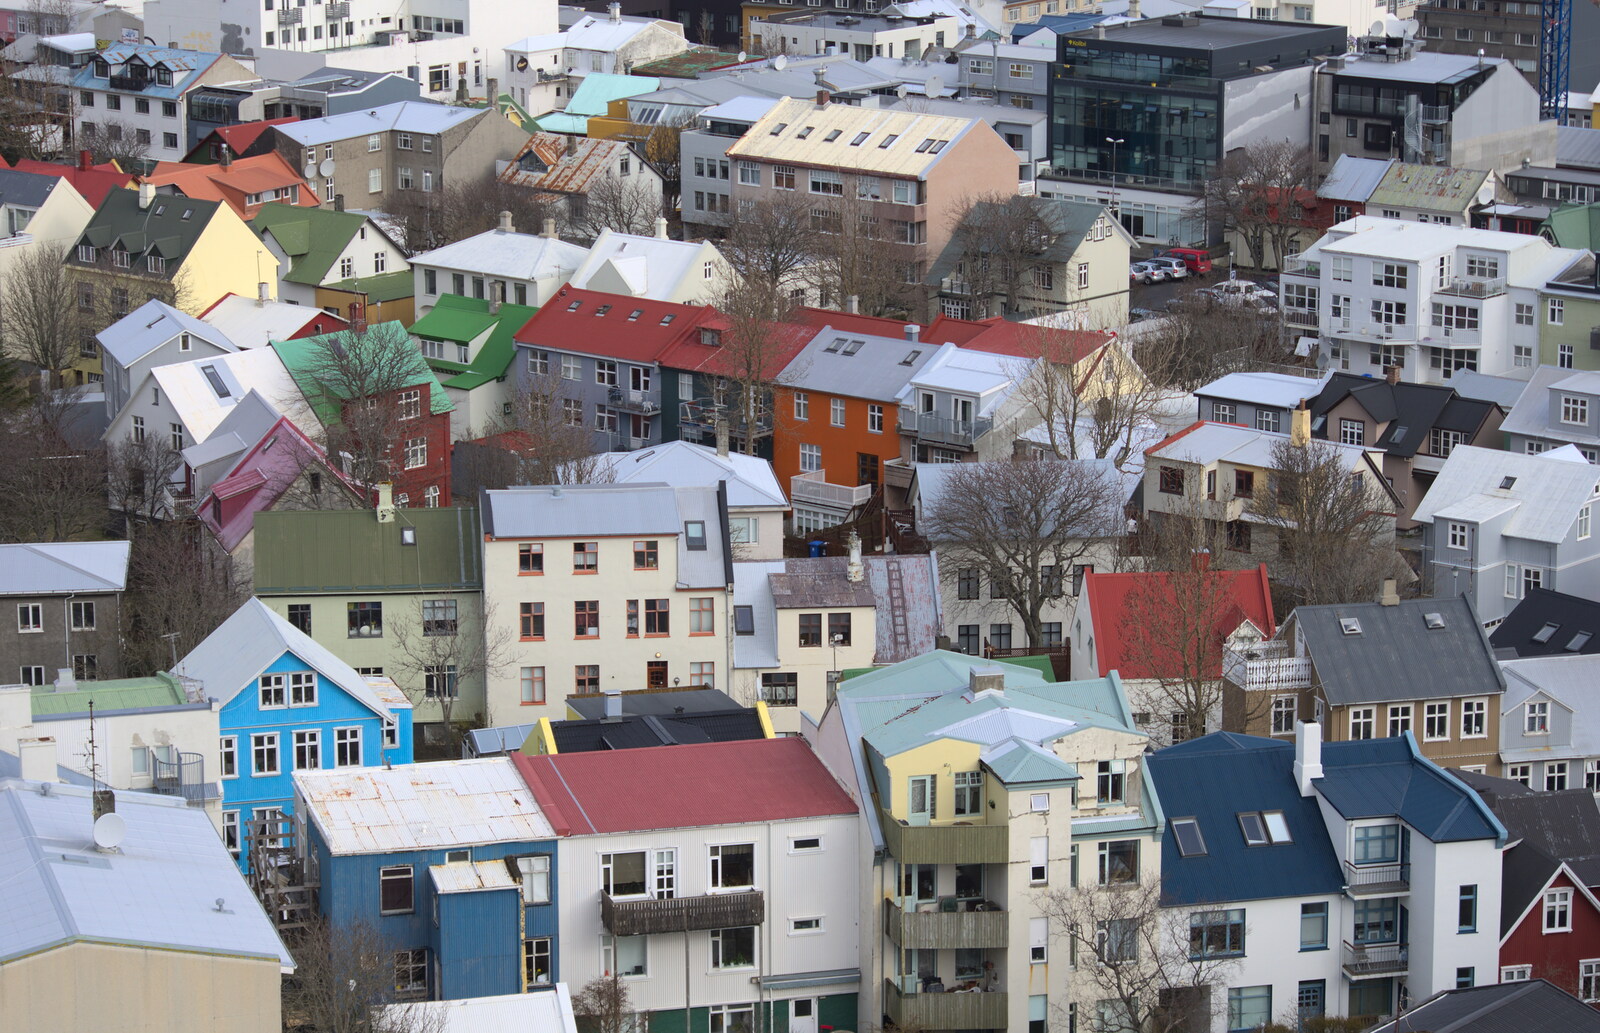 A cluster of Icelandic houses from Hallgrímskirkja Cathedral and Whale Watching, Reykjavik - 21st April 2017